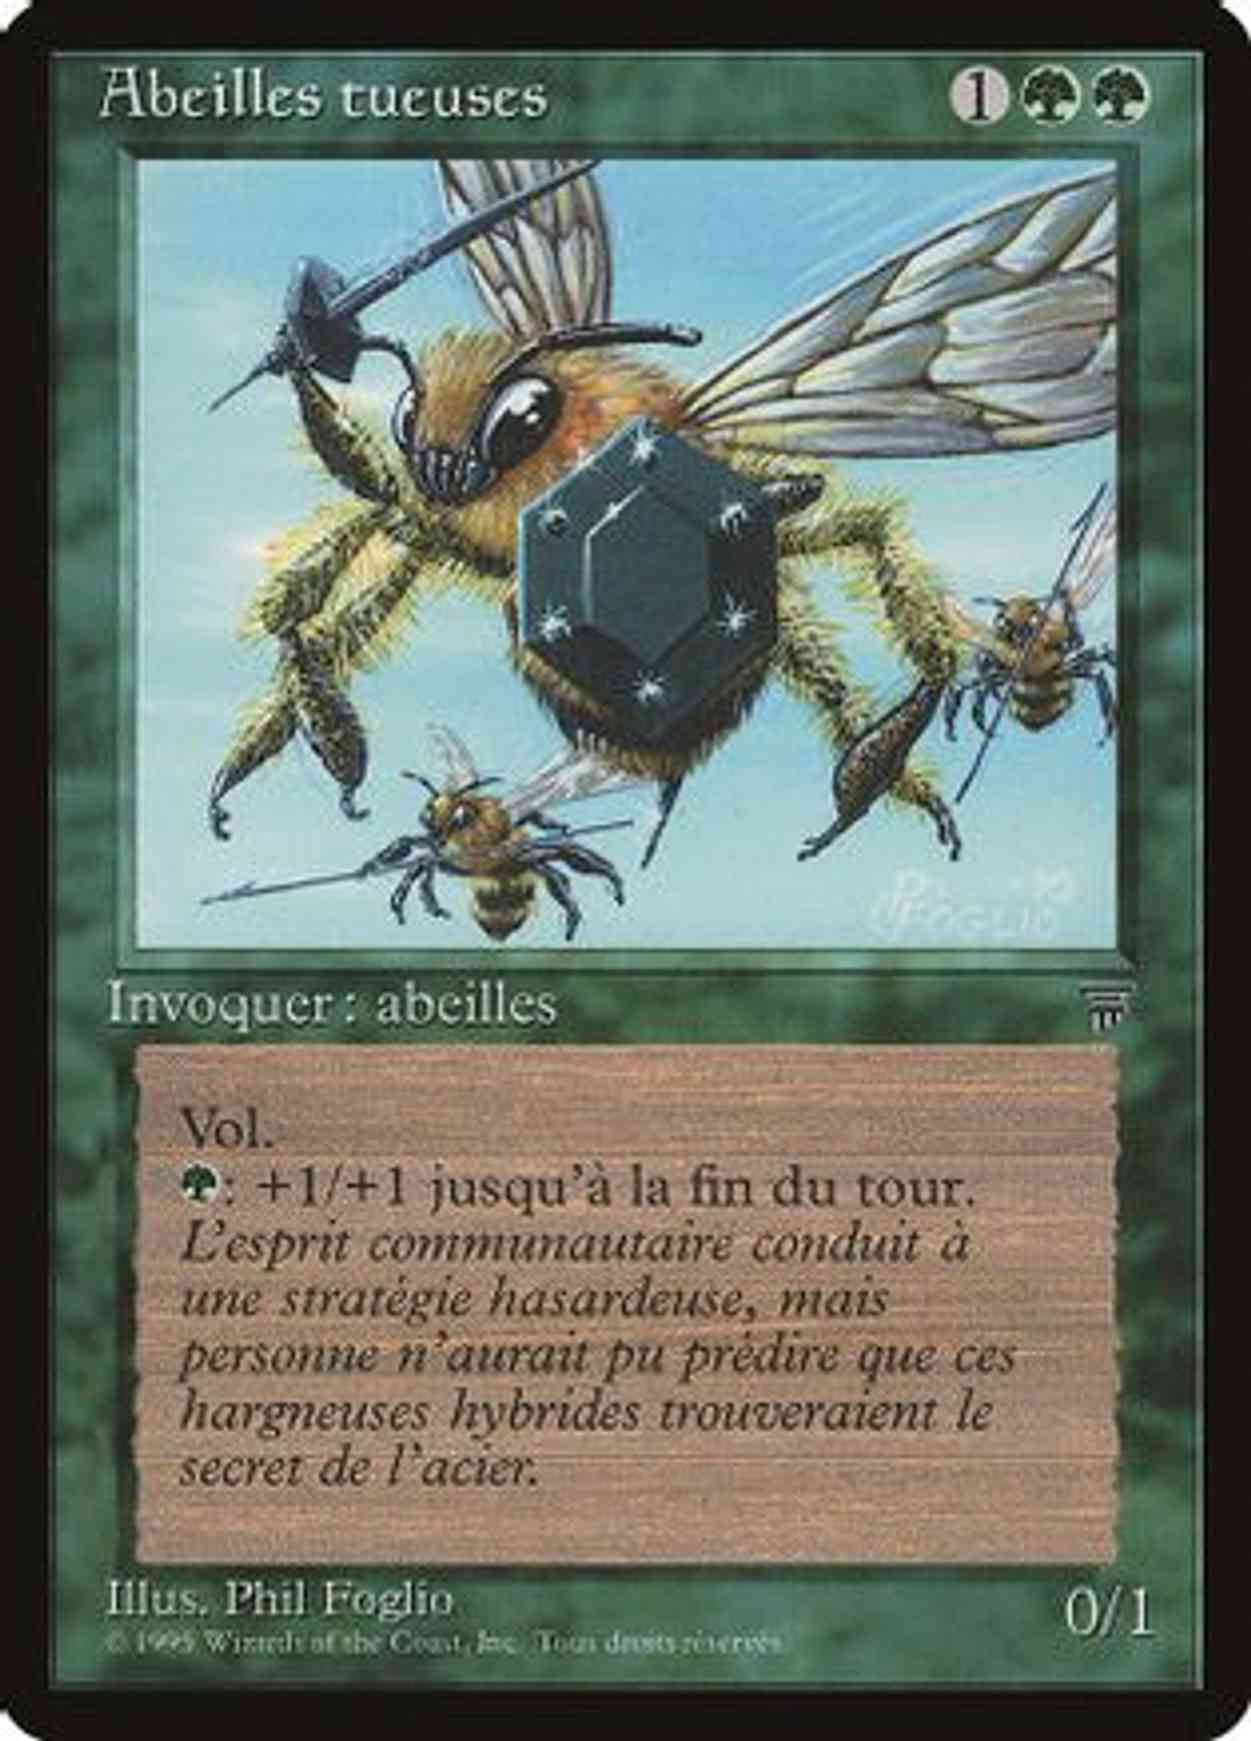 Killer Bees (French) - "Abeilles tueuses" magic card front